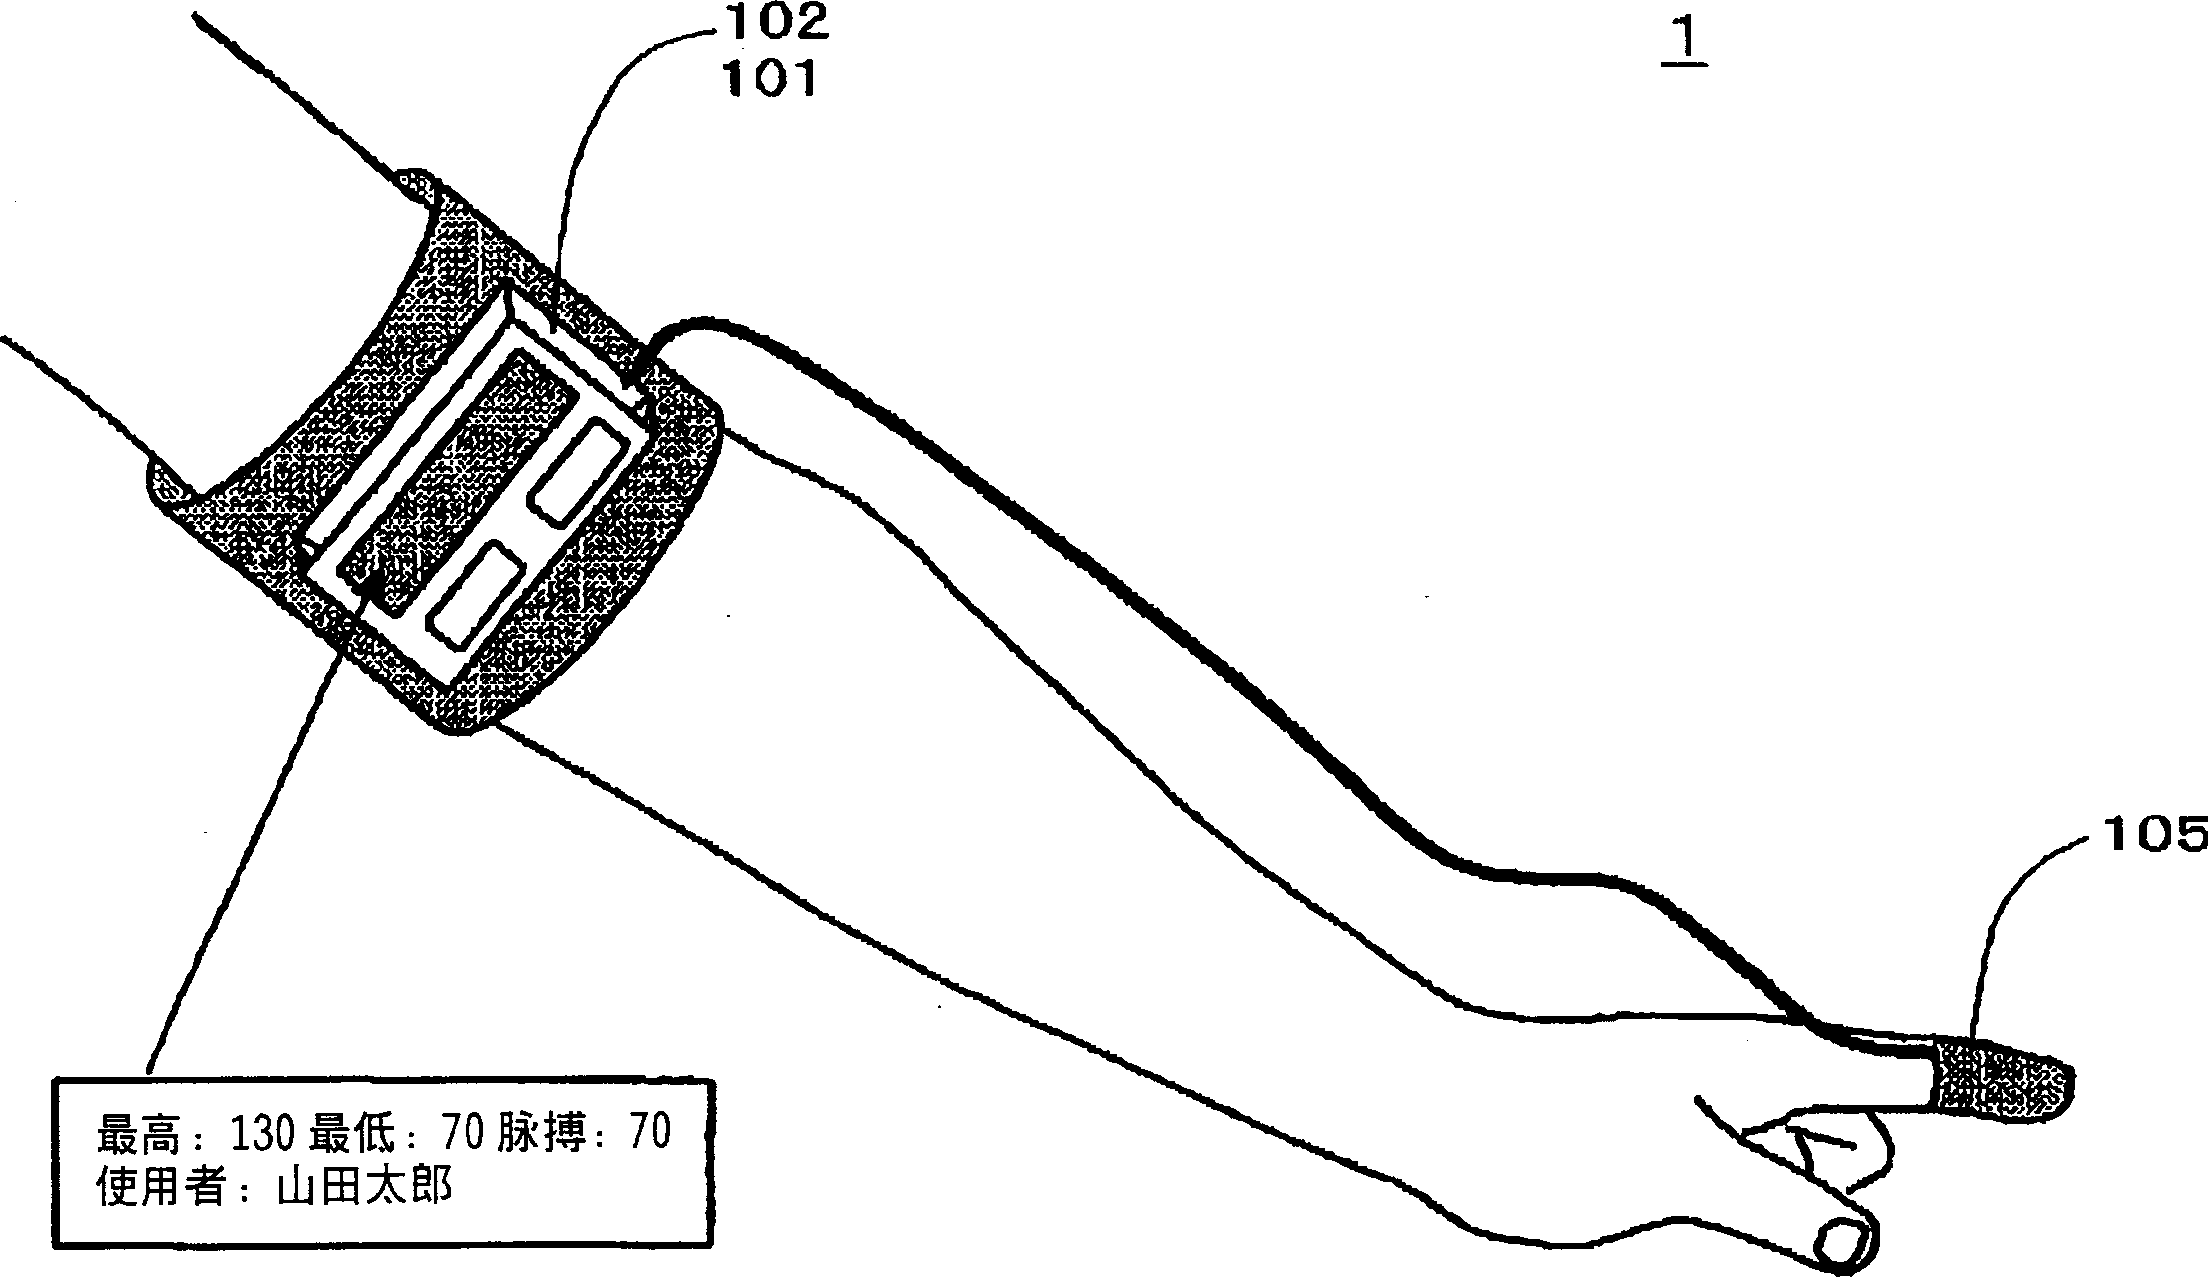 Body information measuring apparatus and sports equipment